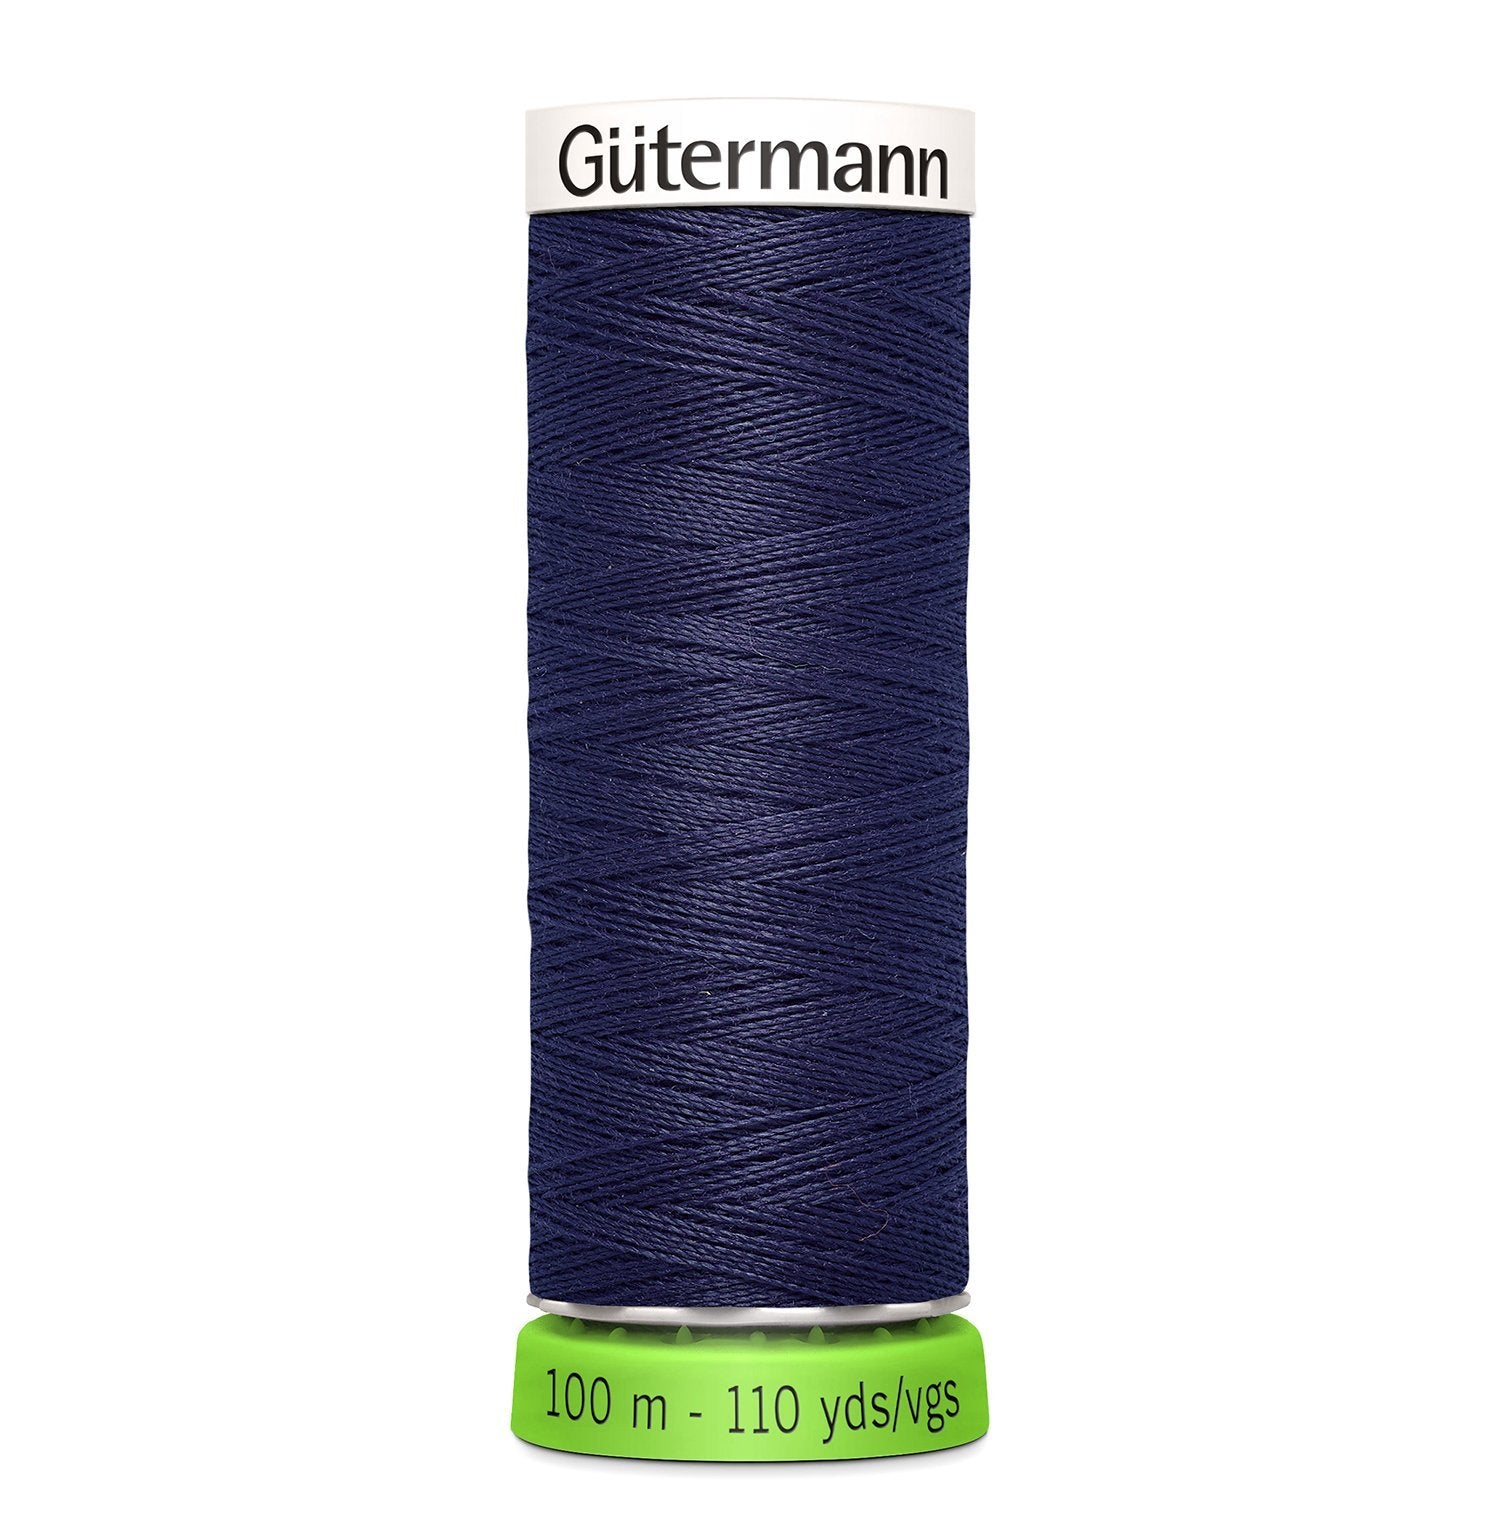 Gutermann Recycled Thread 100m, Colour 575 from Jaycotts Sewing Supplies